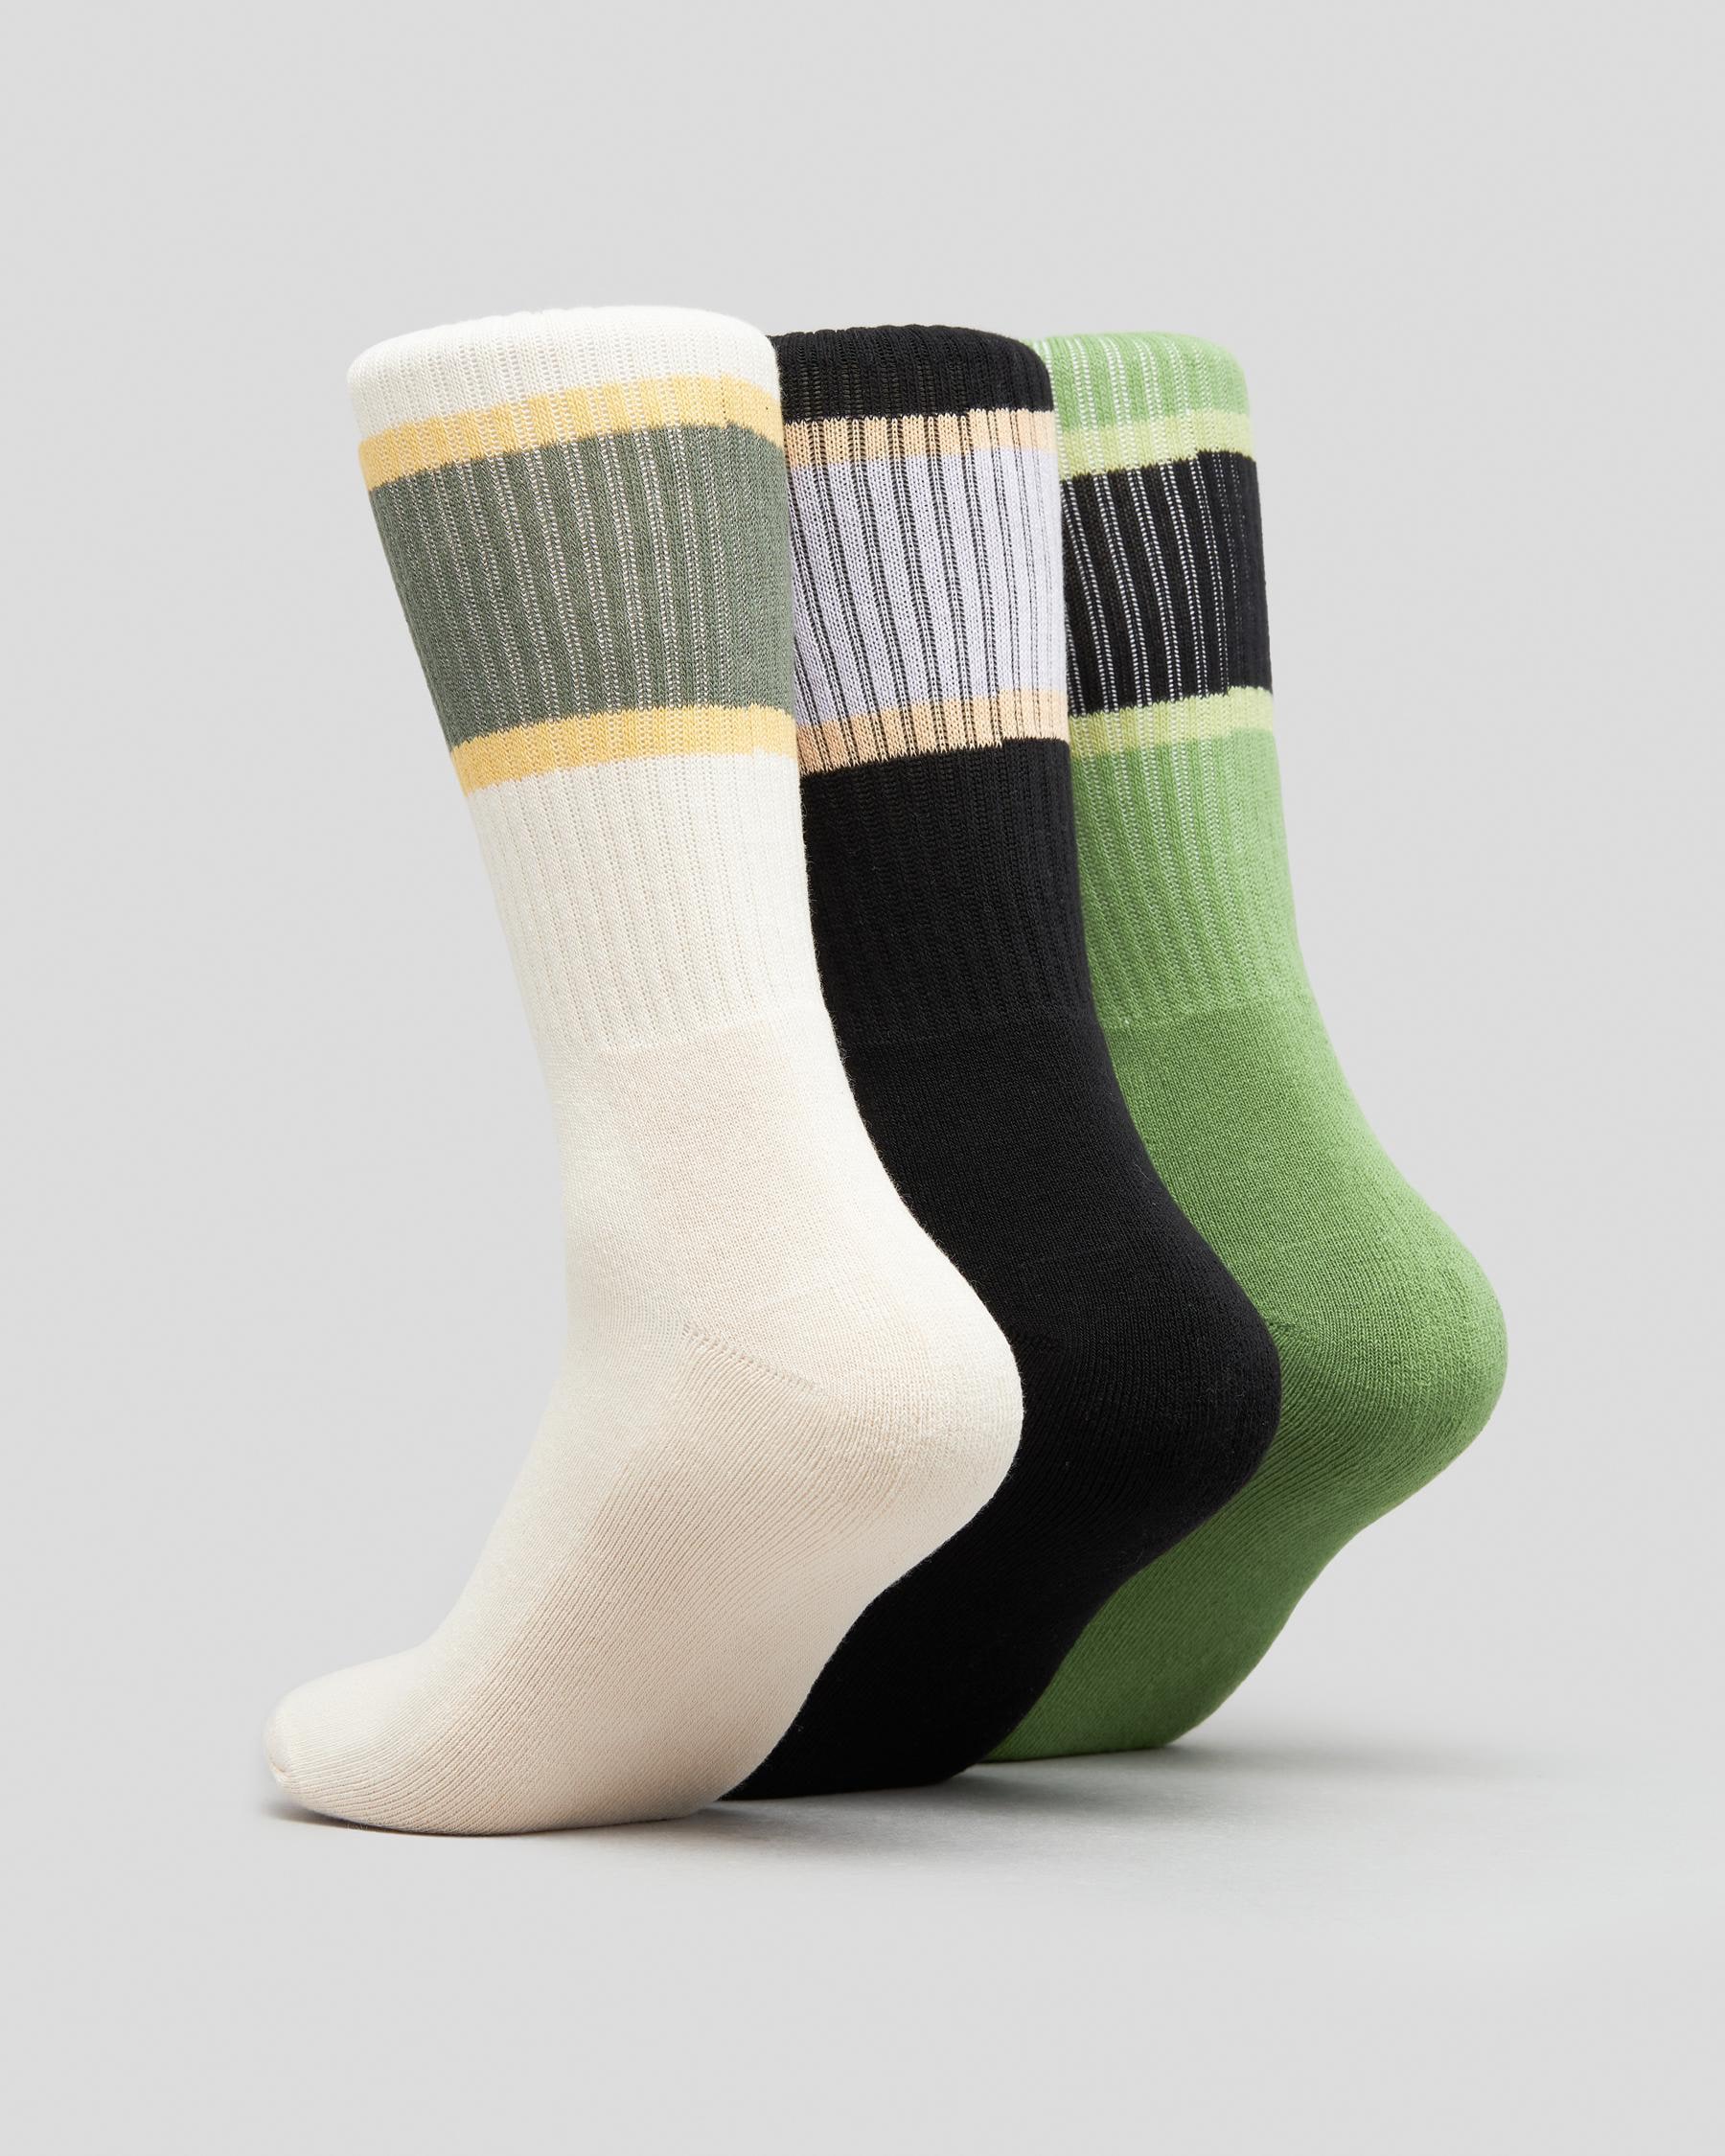 Shop Stussy Designs Socks 3 Pack In Multi - Fast Shipping & Easy ...